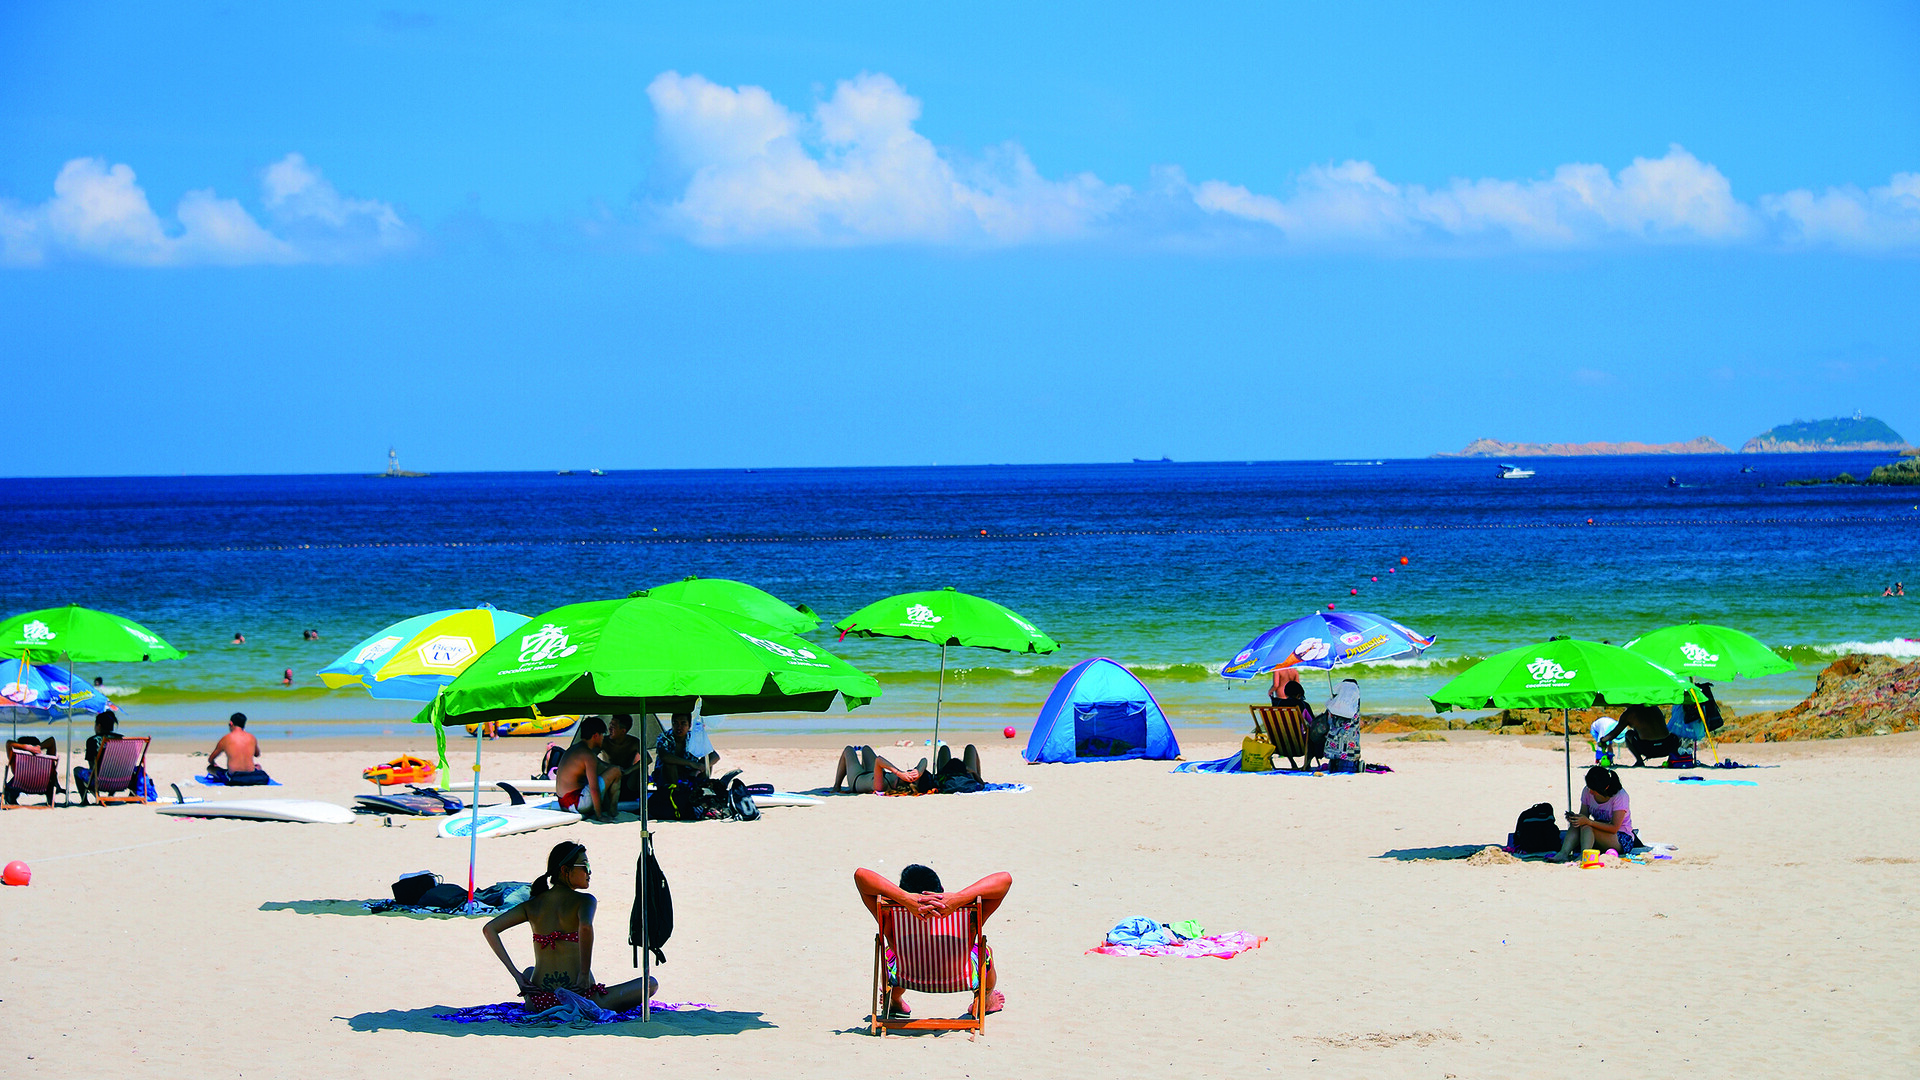 Beach scene with visitors under umbrellas, some lounging on chairs, with ocean backdrop